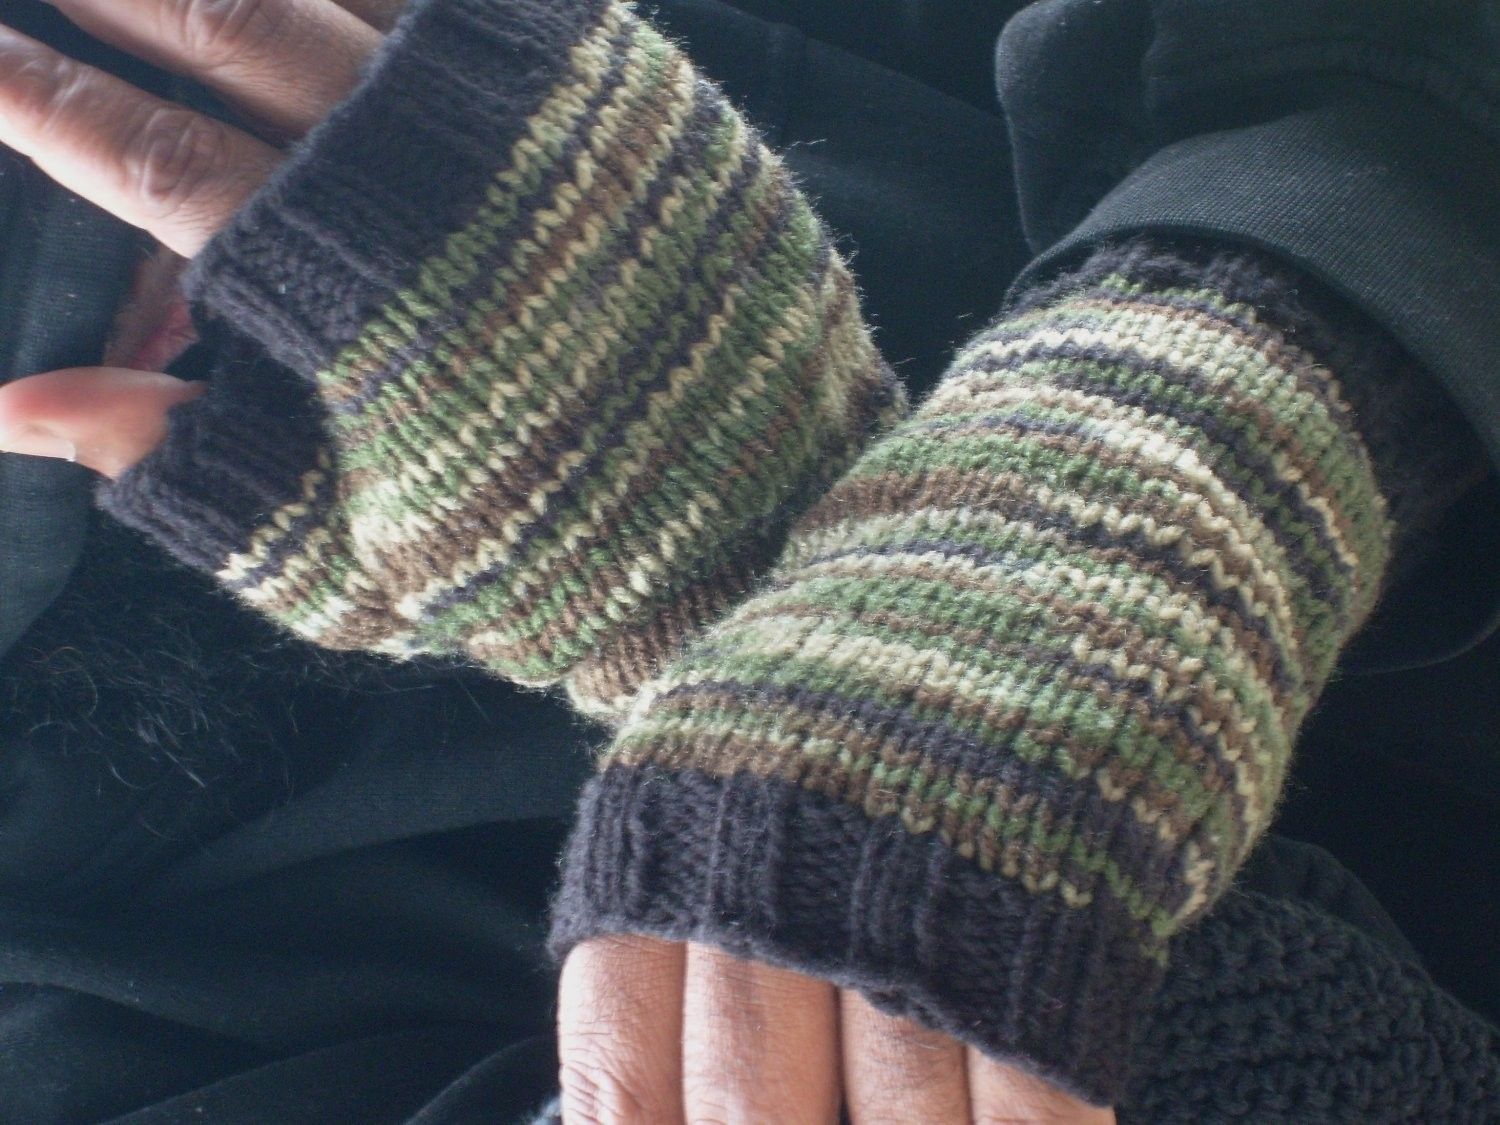 Handmade knitted mittens for hunters